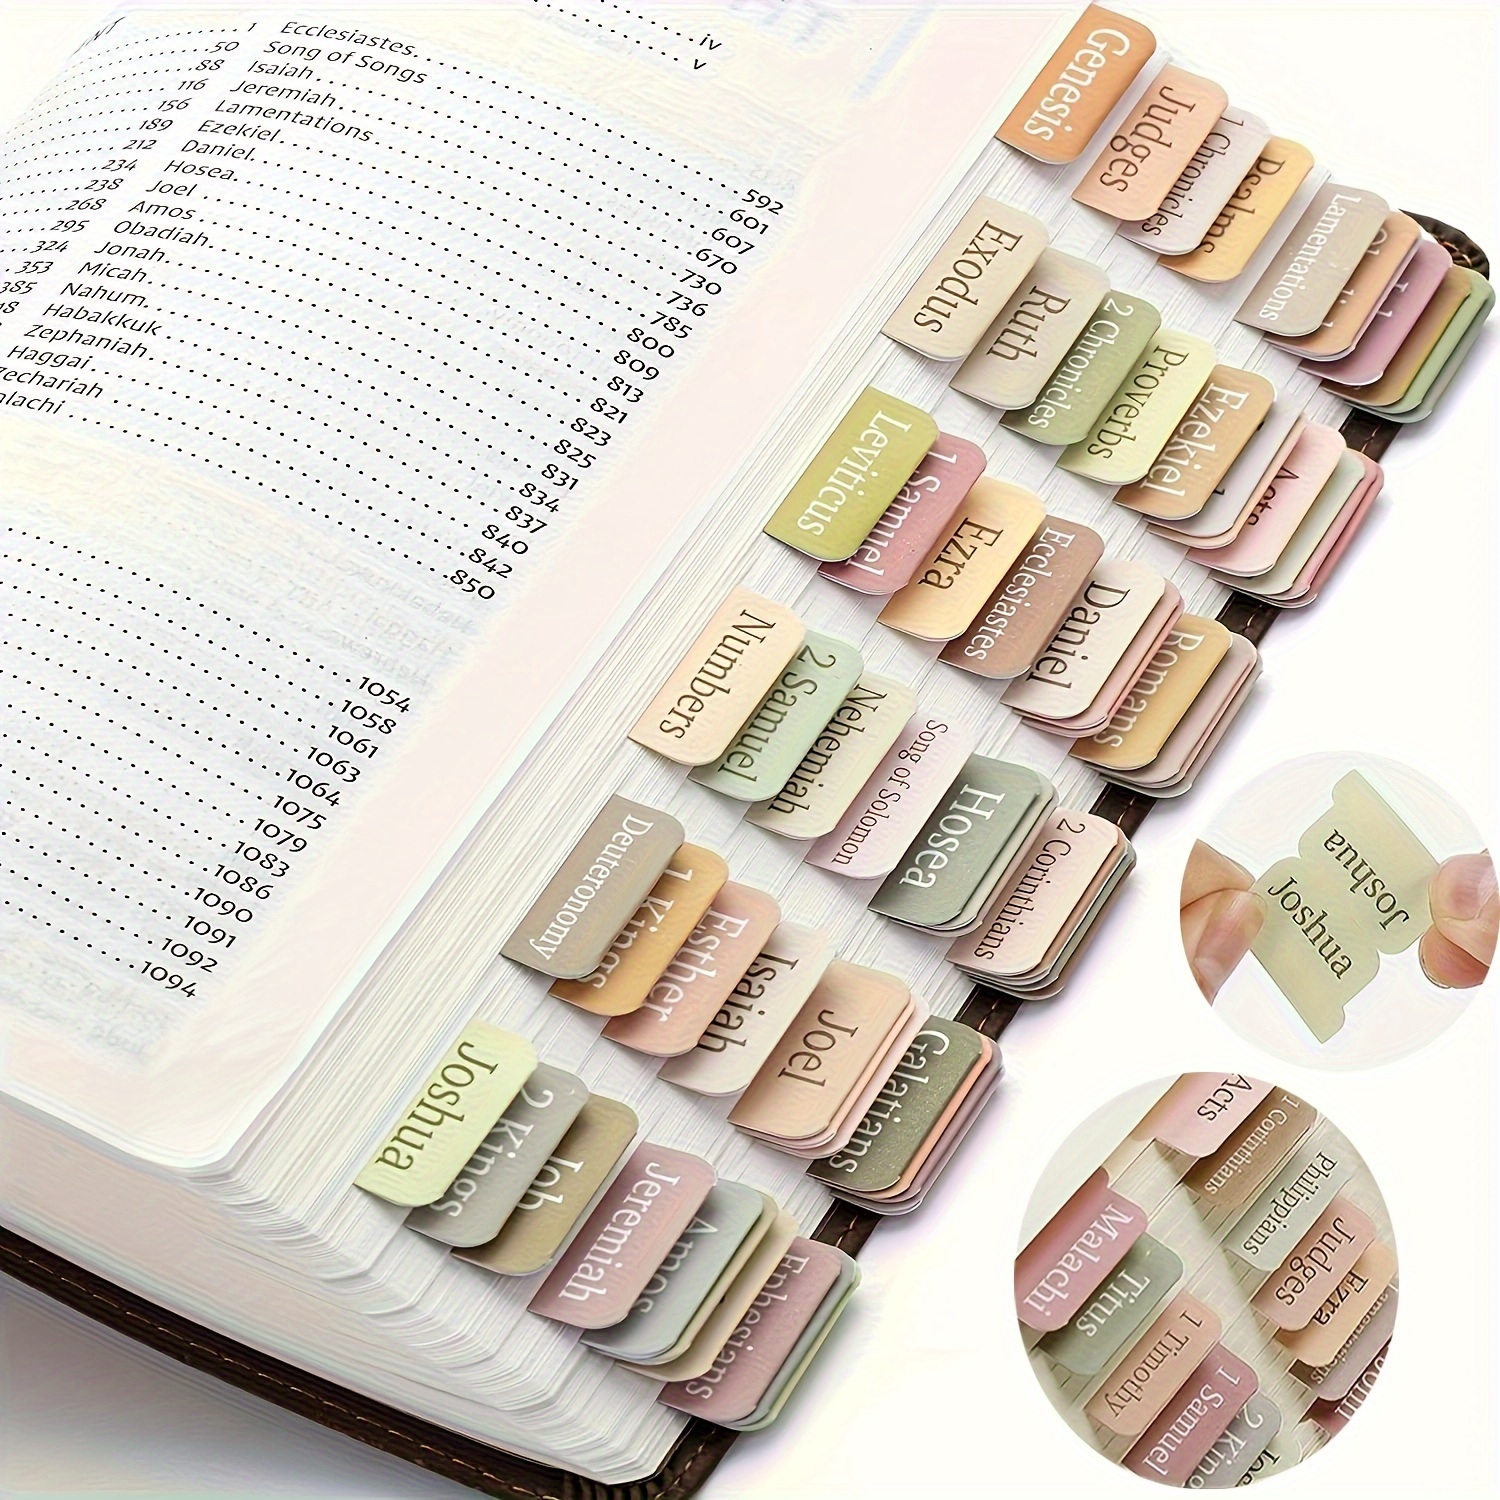 DiverseBee Spanish Bible Tabs (Large Print, Easy to Read), Bible Journaling Book Tabs, Christian Gift, 66 Bible Tabs Old and New Testament, Includes